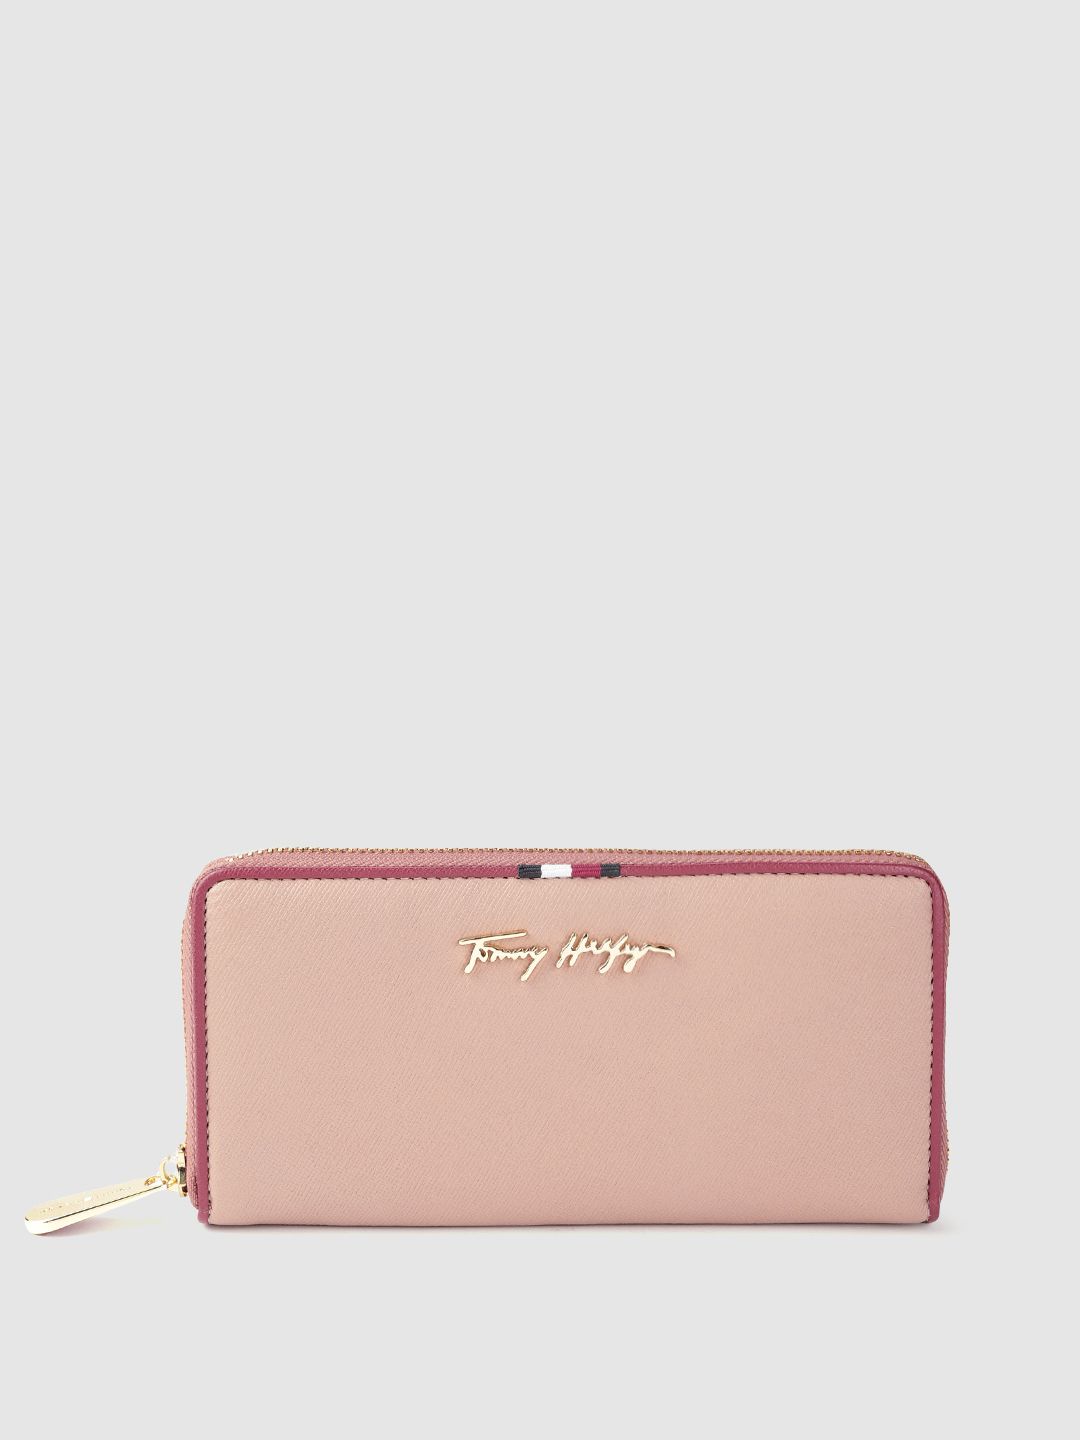 Tommy Hilfiger Women Pink Textured Embellished Leather Zip Around Wallet Price in India